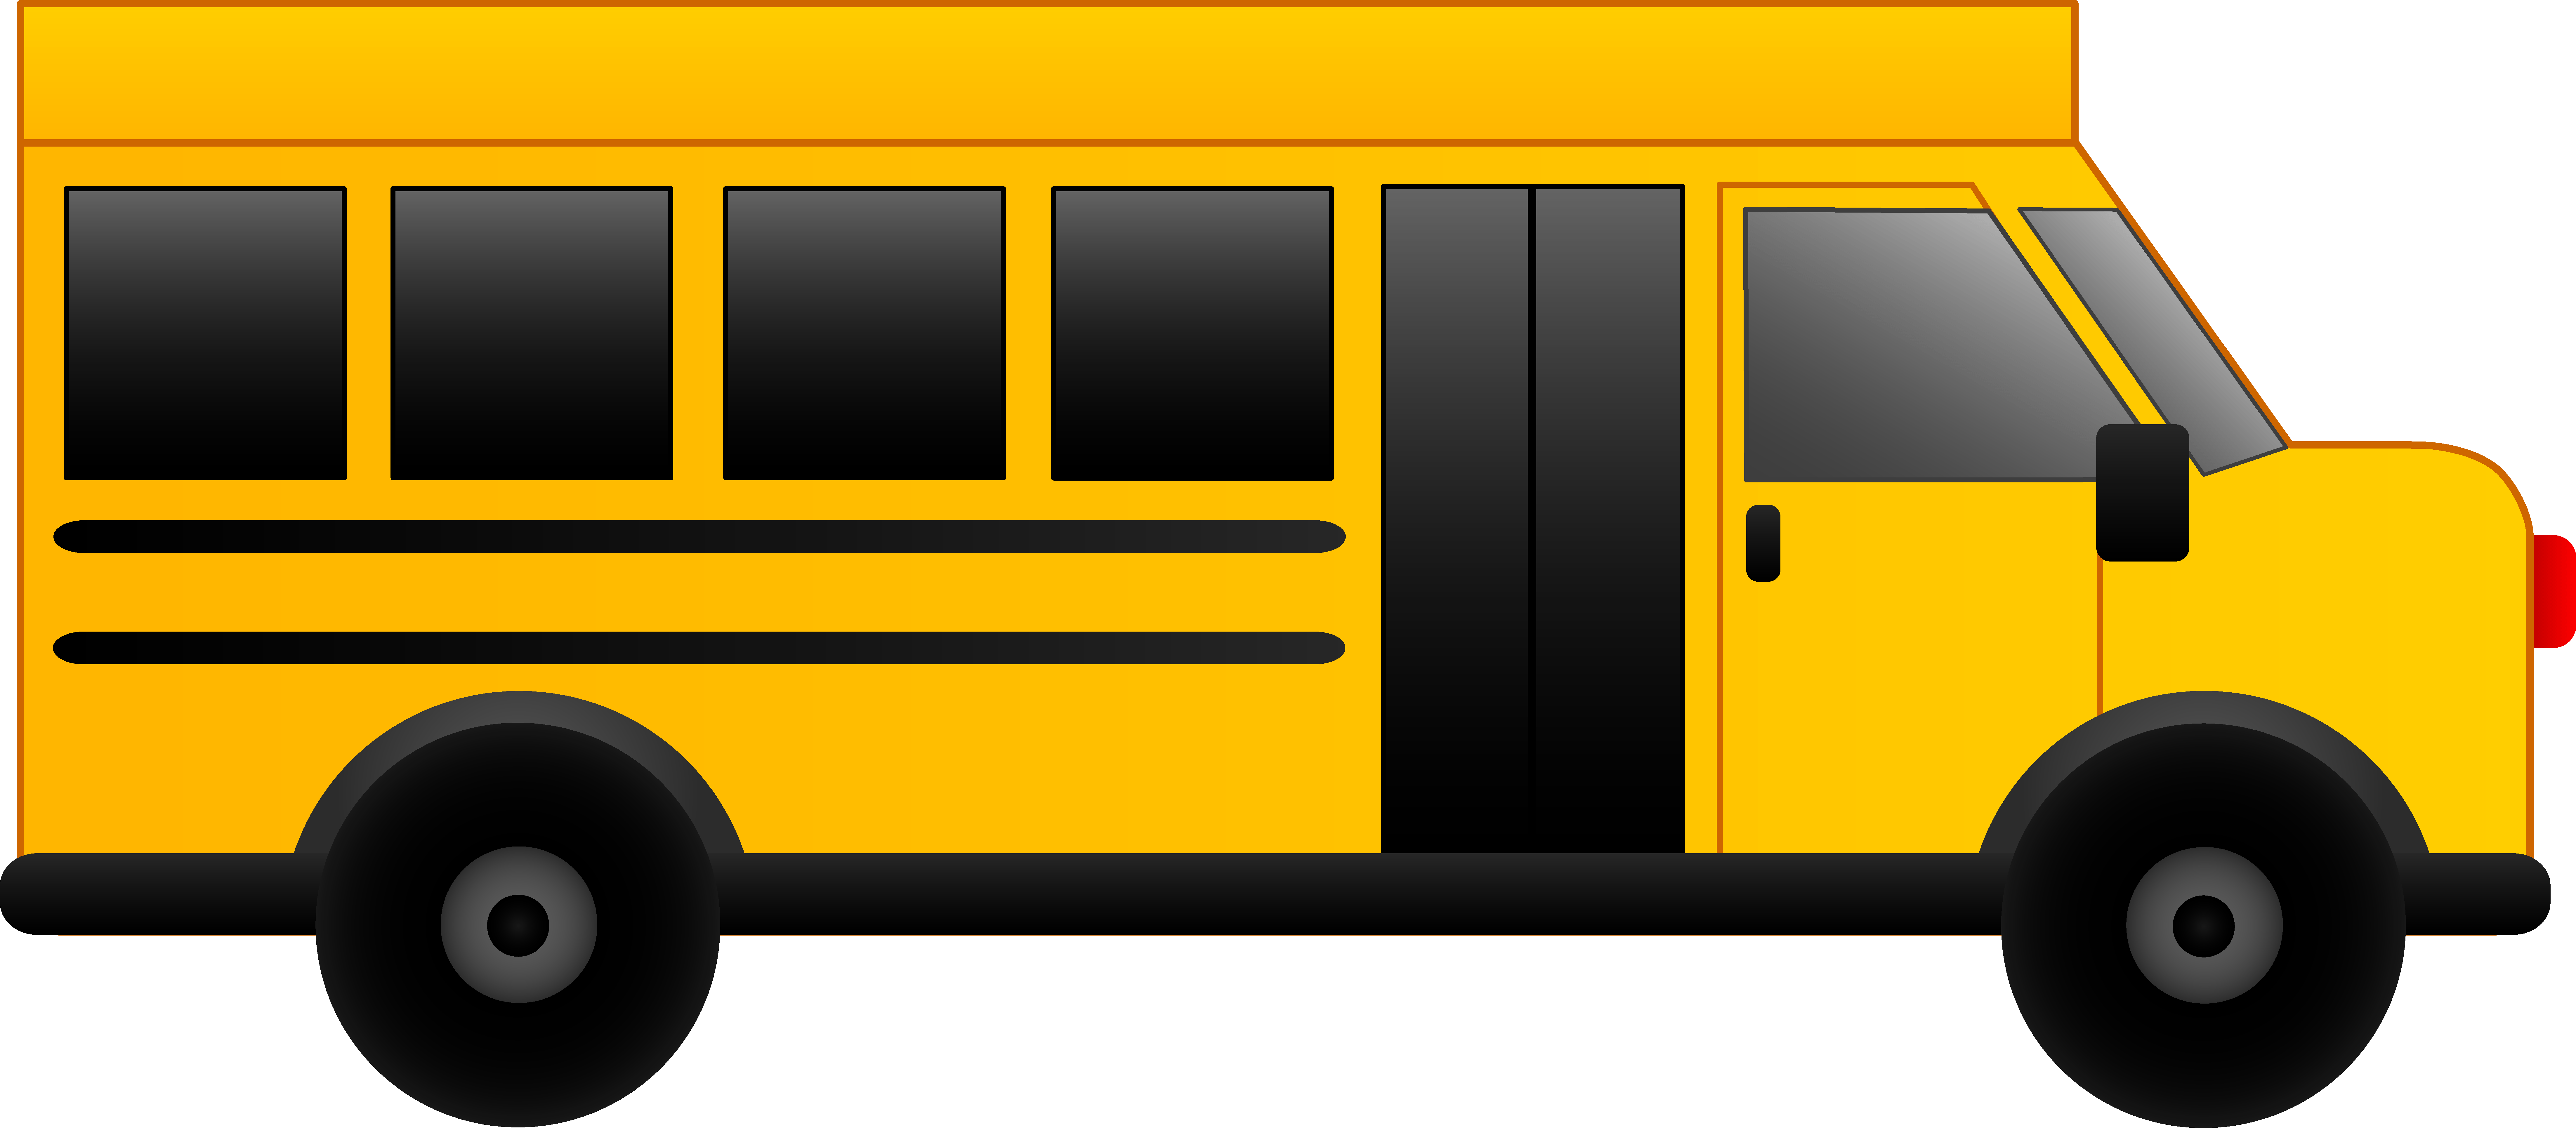 Free Picture Of School Busses, Download Free Clip Art, Free